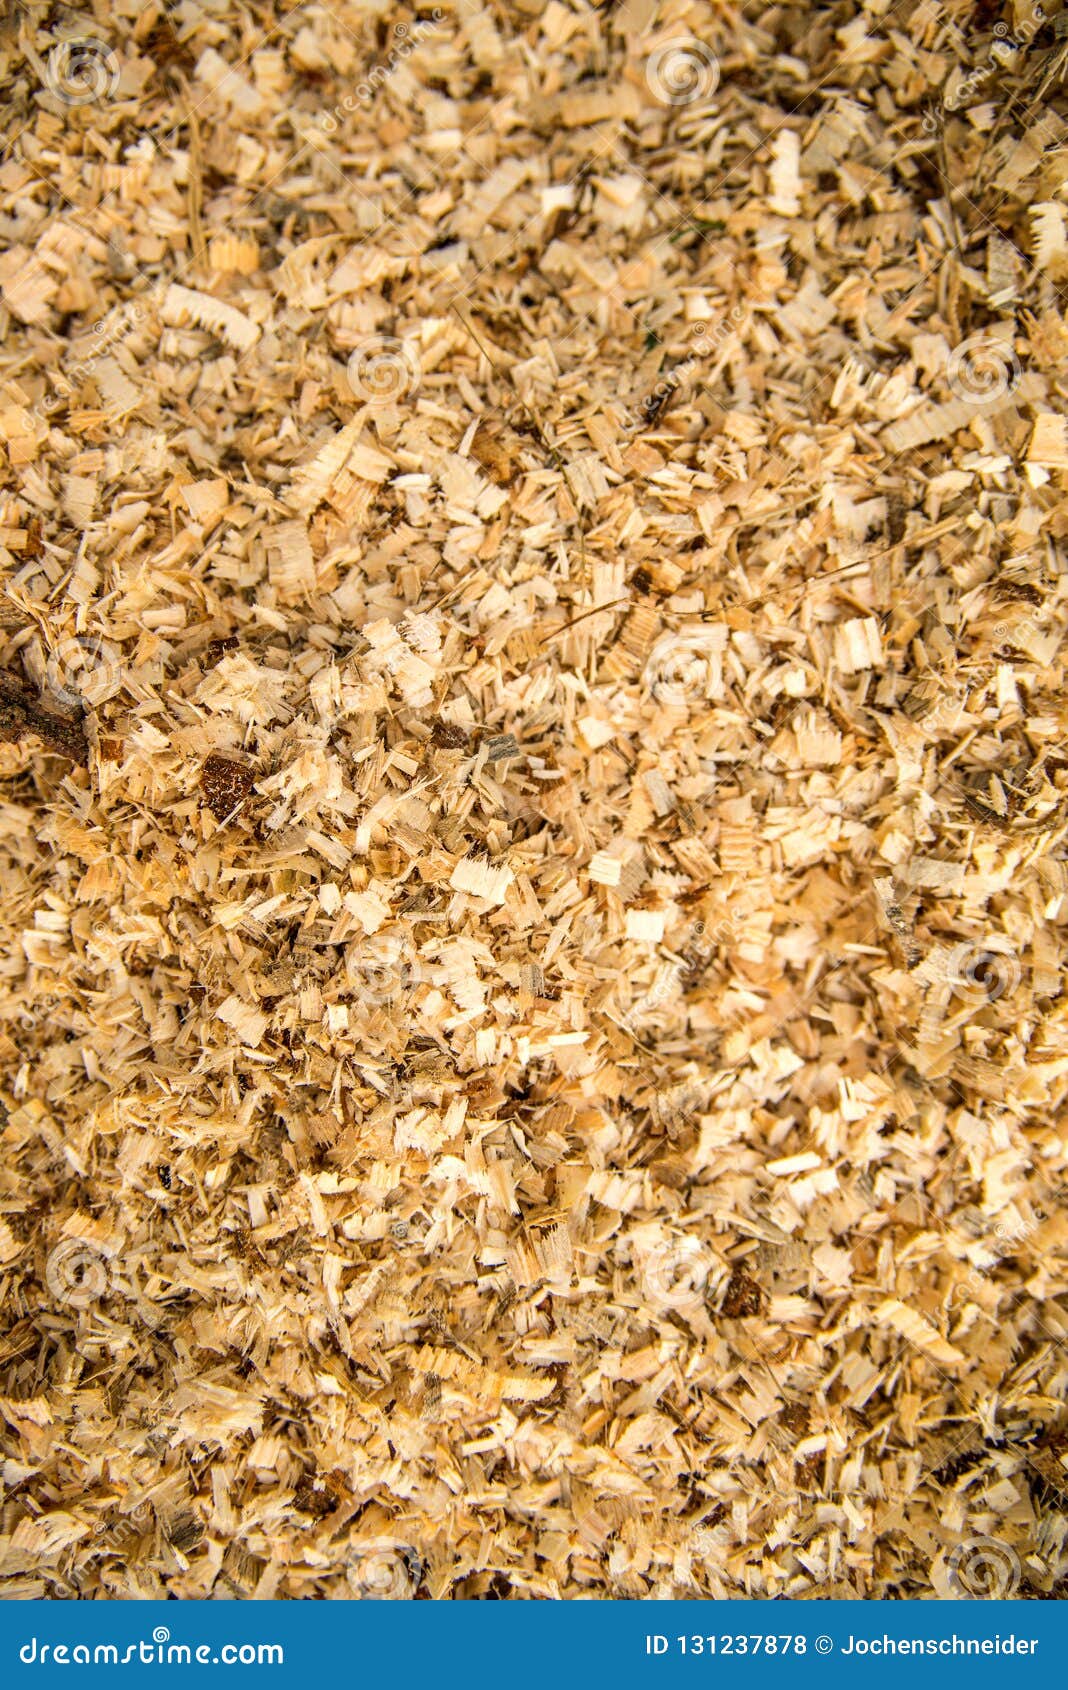 Sawdust On A Forest Floor Stock Photo Image Of Shavings 131237878